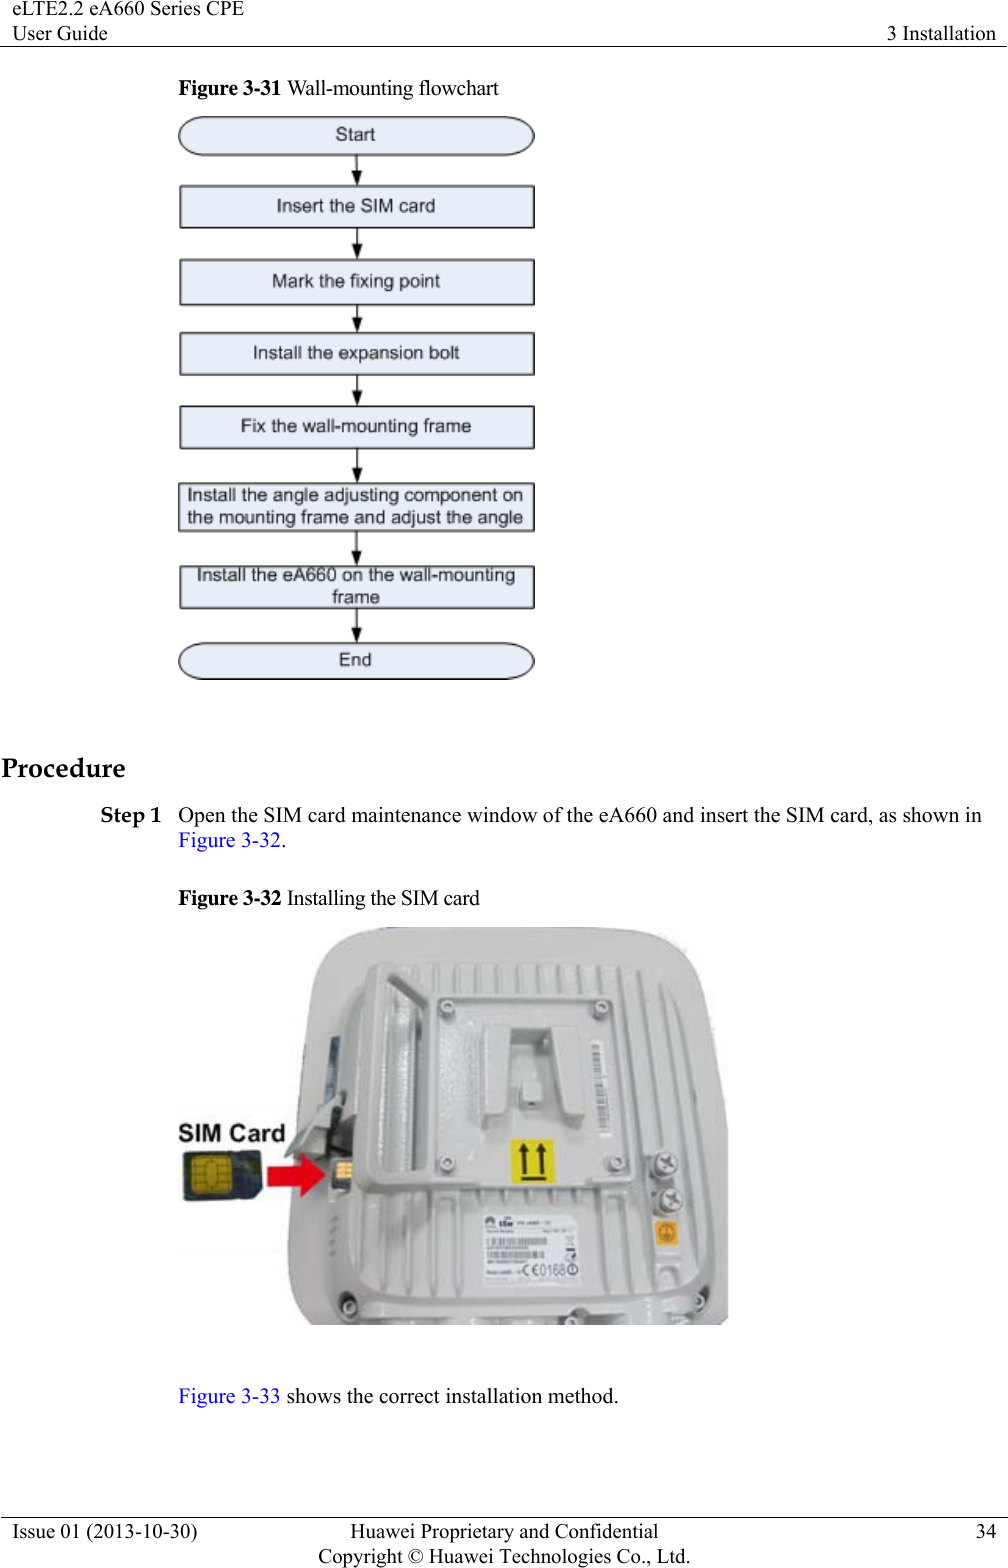 eLTE2.2 eA660 Series CPE User Guide  3 Installation Issue 01 (2013-10-30)  Huawei Proprietary and Confidential         Copyright © Huawei Technologies Co., Ltd.34 Figure 3-31 Wall-mounting flowchart   Procedure Step 1 Open the SIM card maintenance window of the eA660 and insert the SIM card, as shown in Figure 3-32. Figure 3-32 Installing the SIM card   Figure 3-33 shows the correct installation method. 